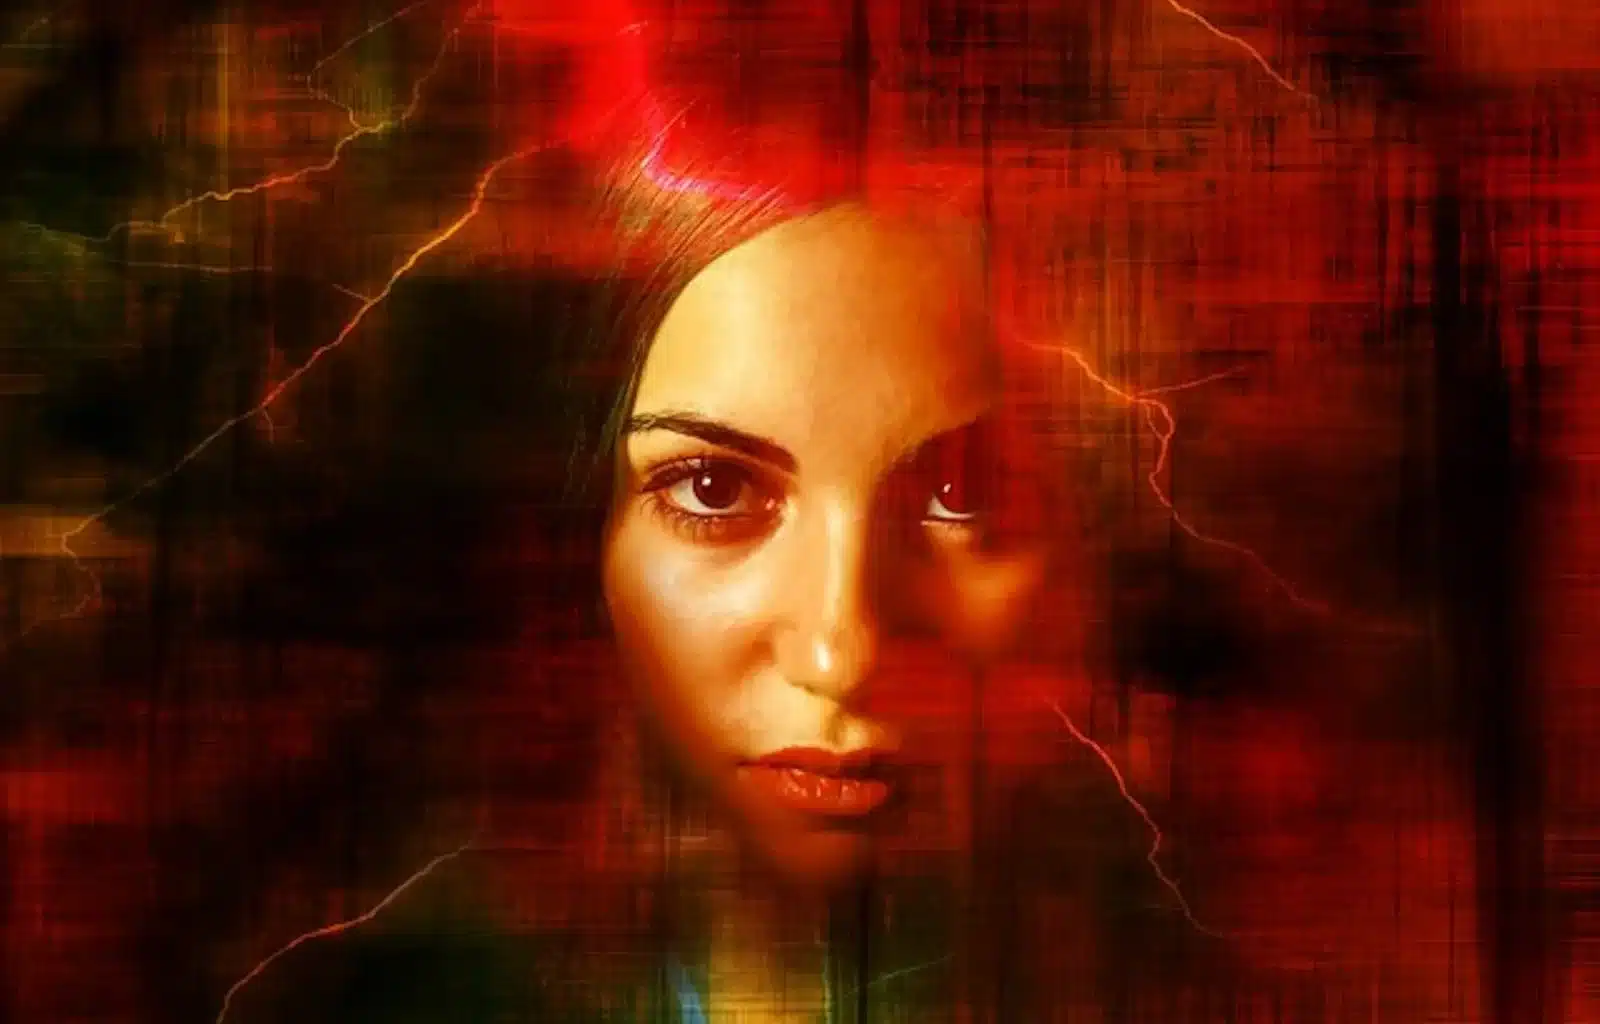 A woman stands in the center of a lightning storm against a red and black background.It also shows seduction by desire and the allure of the night, entangled in passion and longing, left with only memories and the blues.